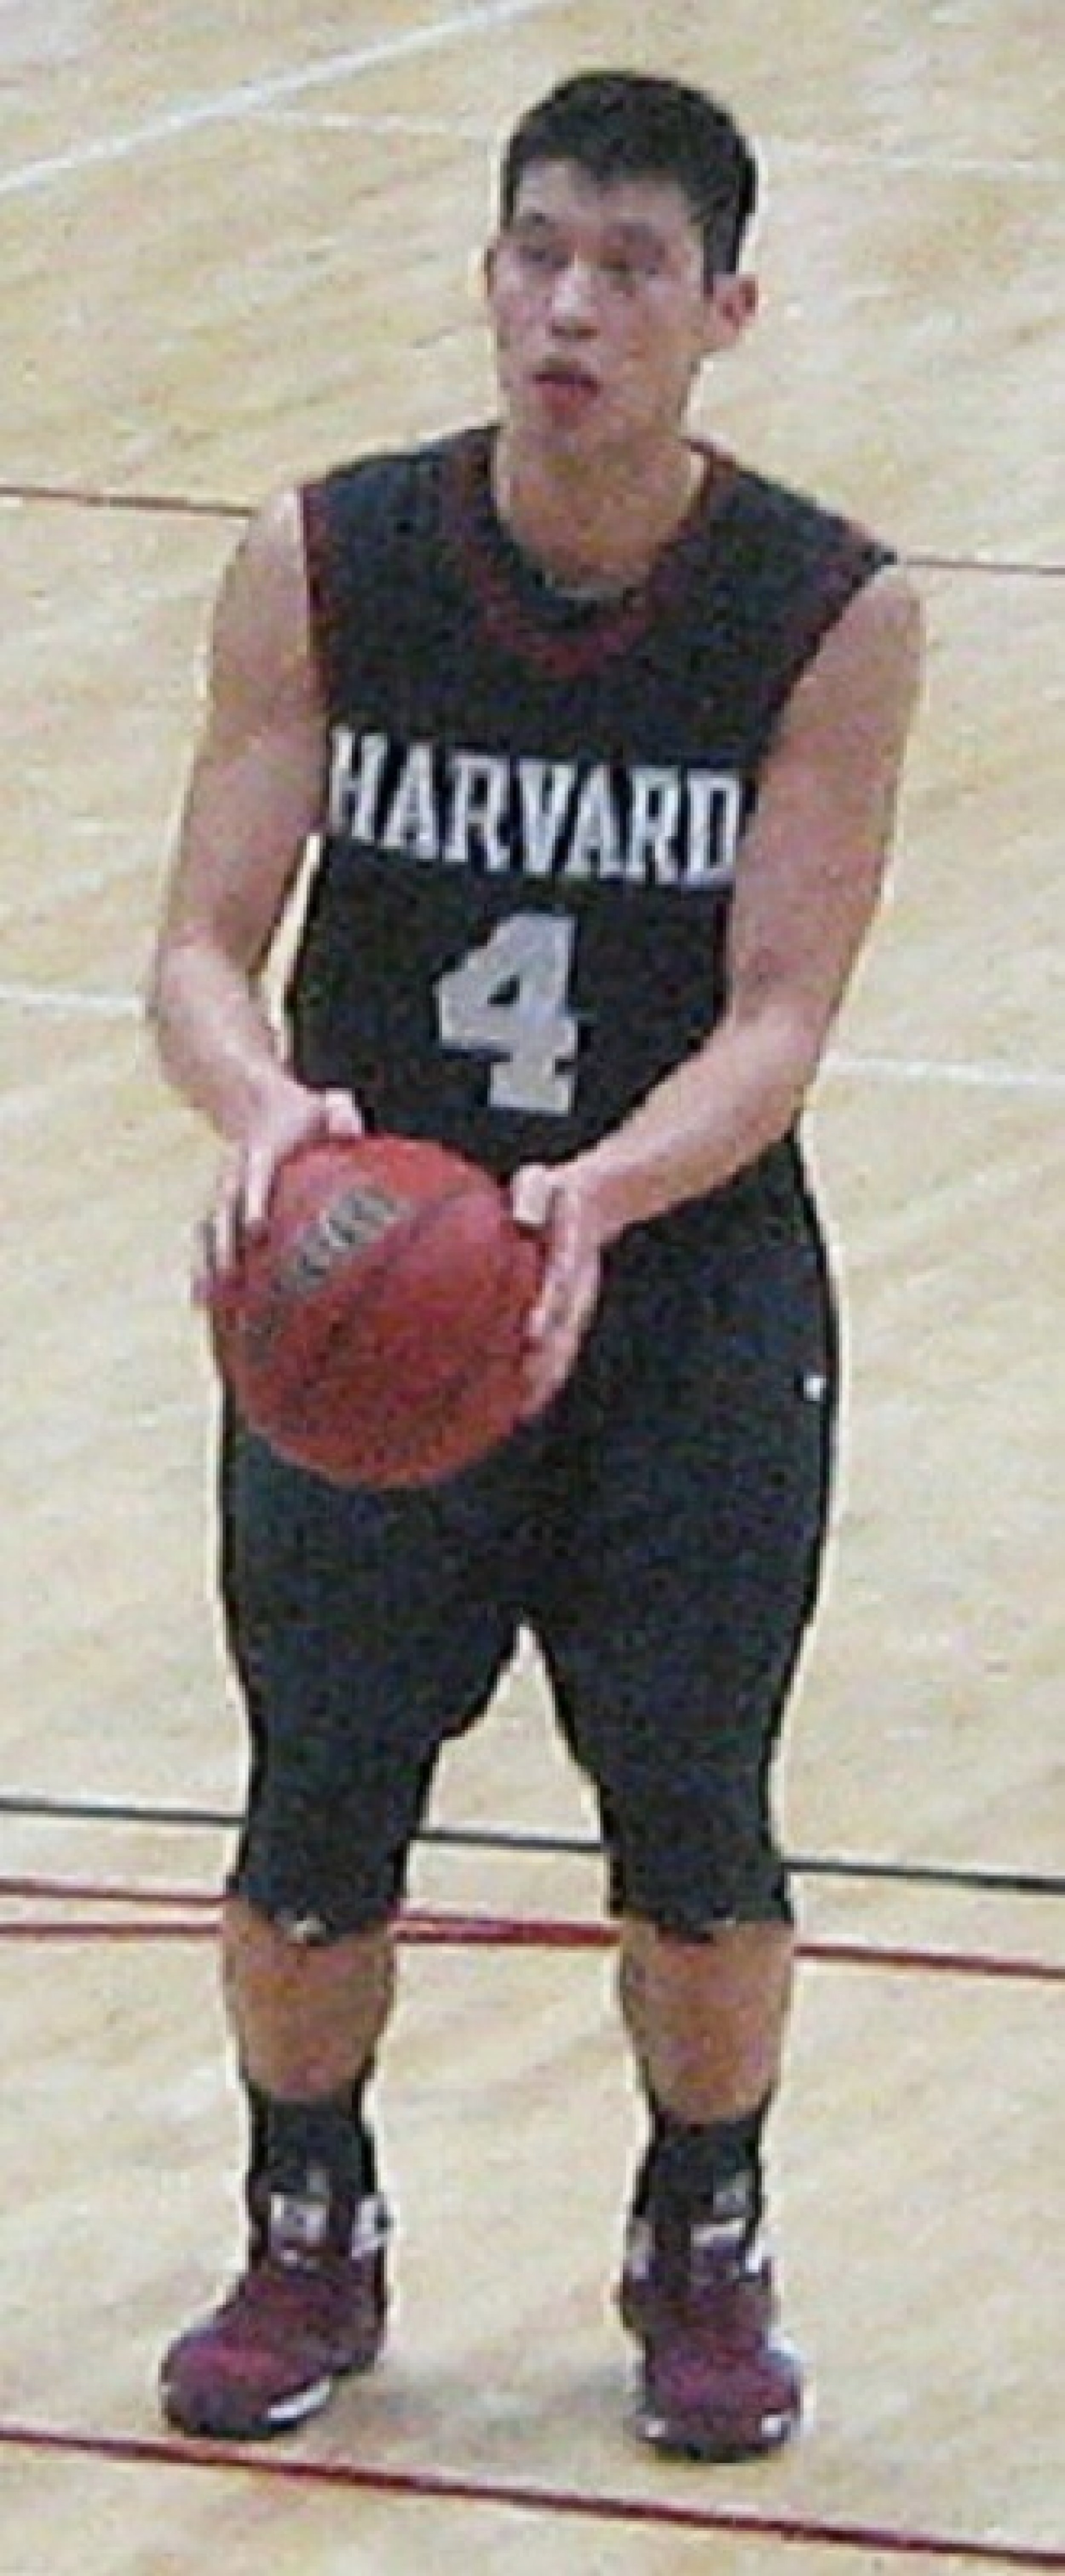 Free throws for Harvard